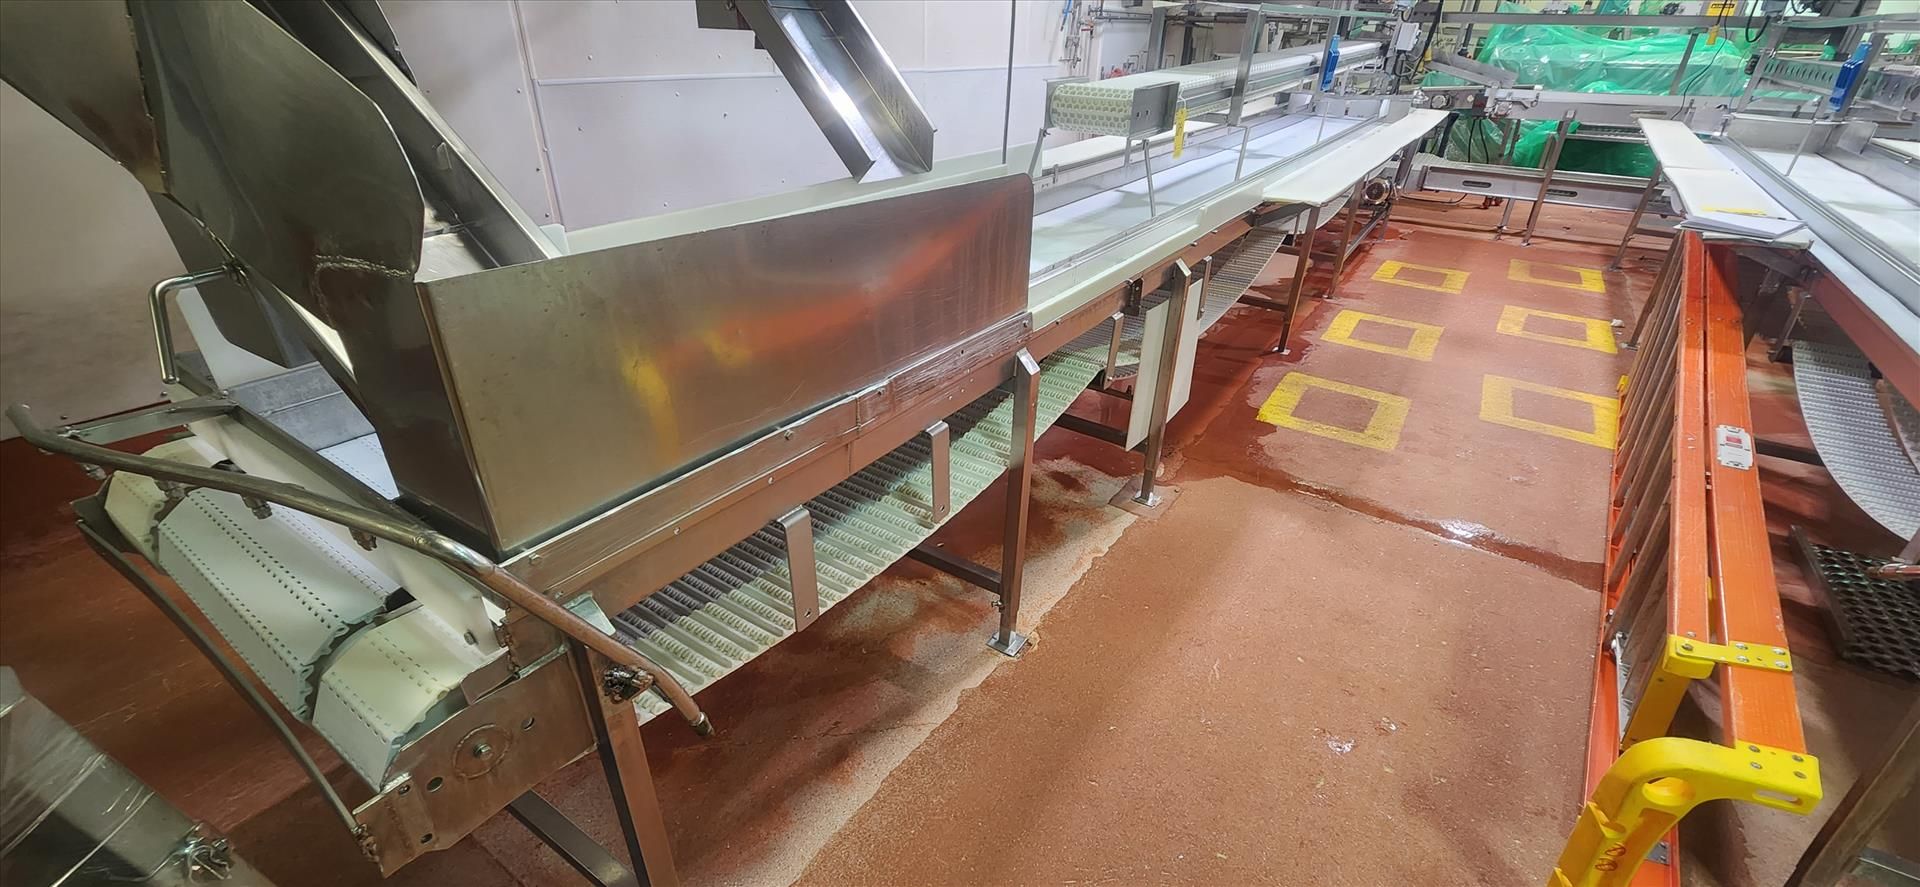 drum/thigh/leg conveyor, 3-belt, stainless steel frame, wash down motor, approx. 6/6/18 in. x 19 ft.